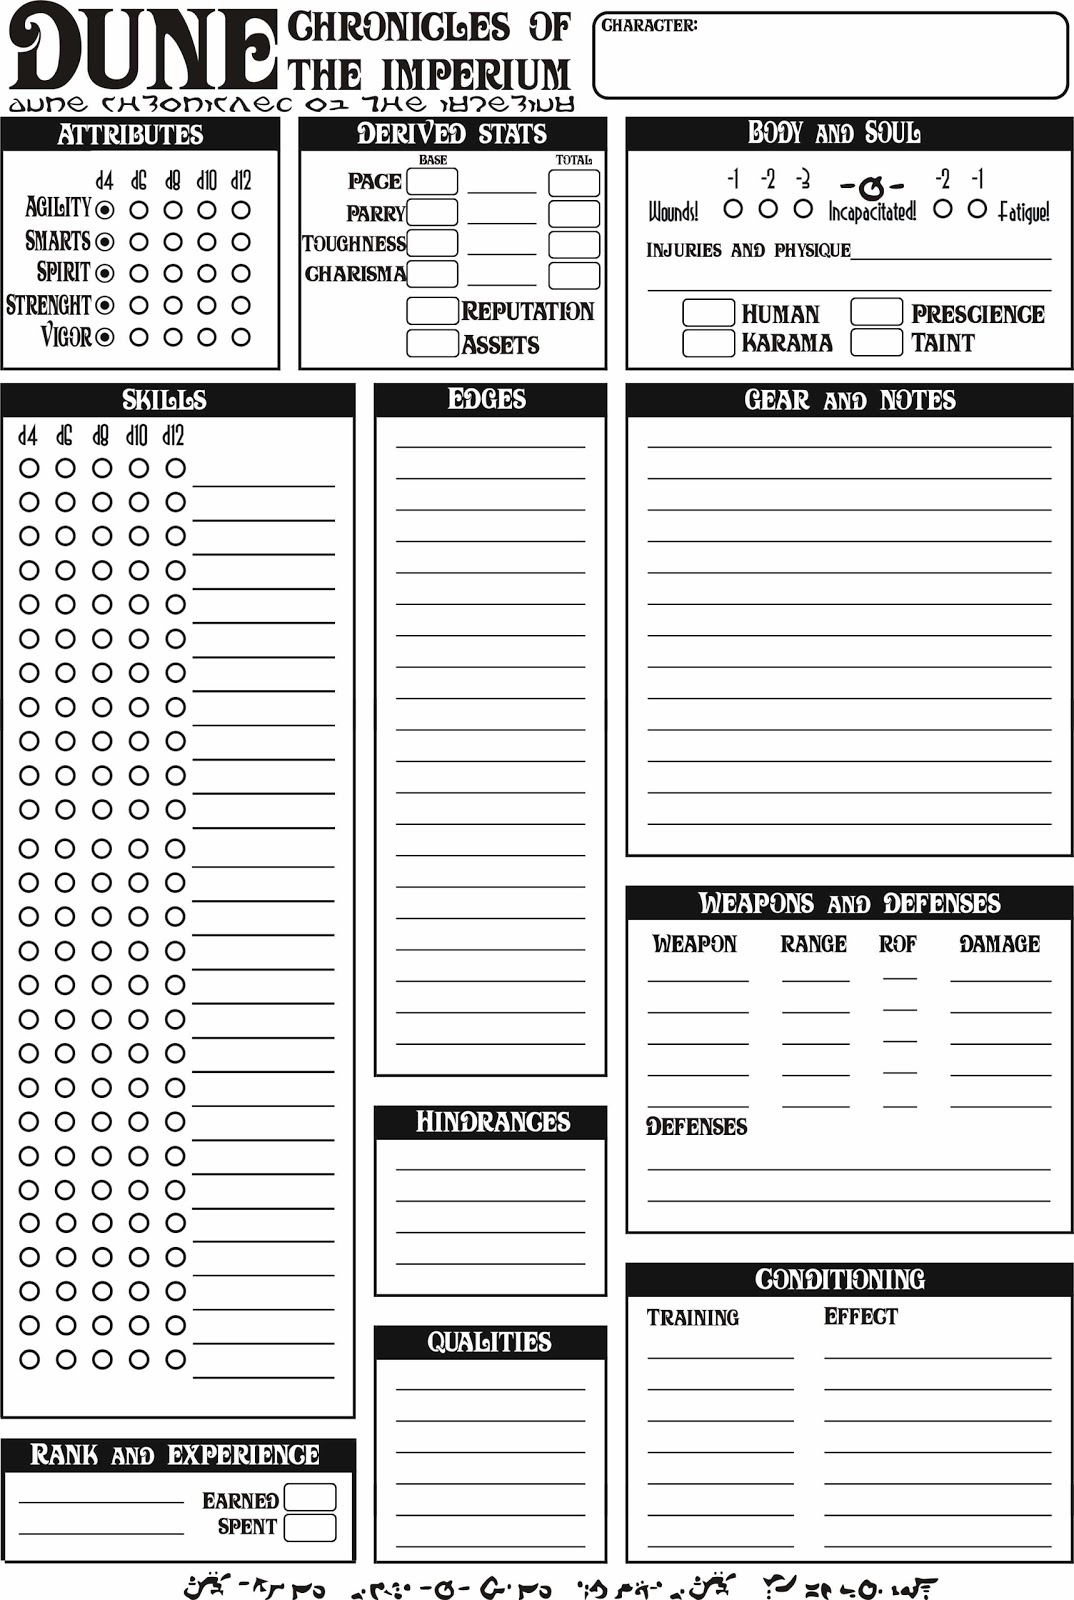 Dune rpg chronicles of the imperium character sheet - naxresquared